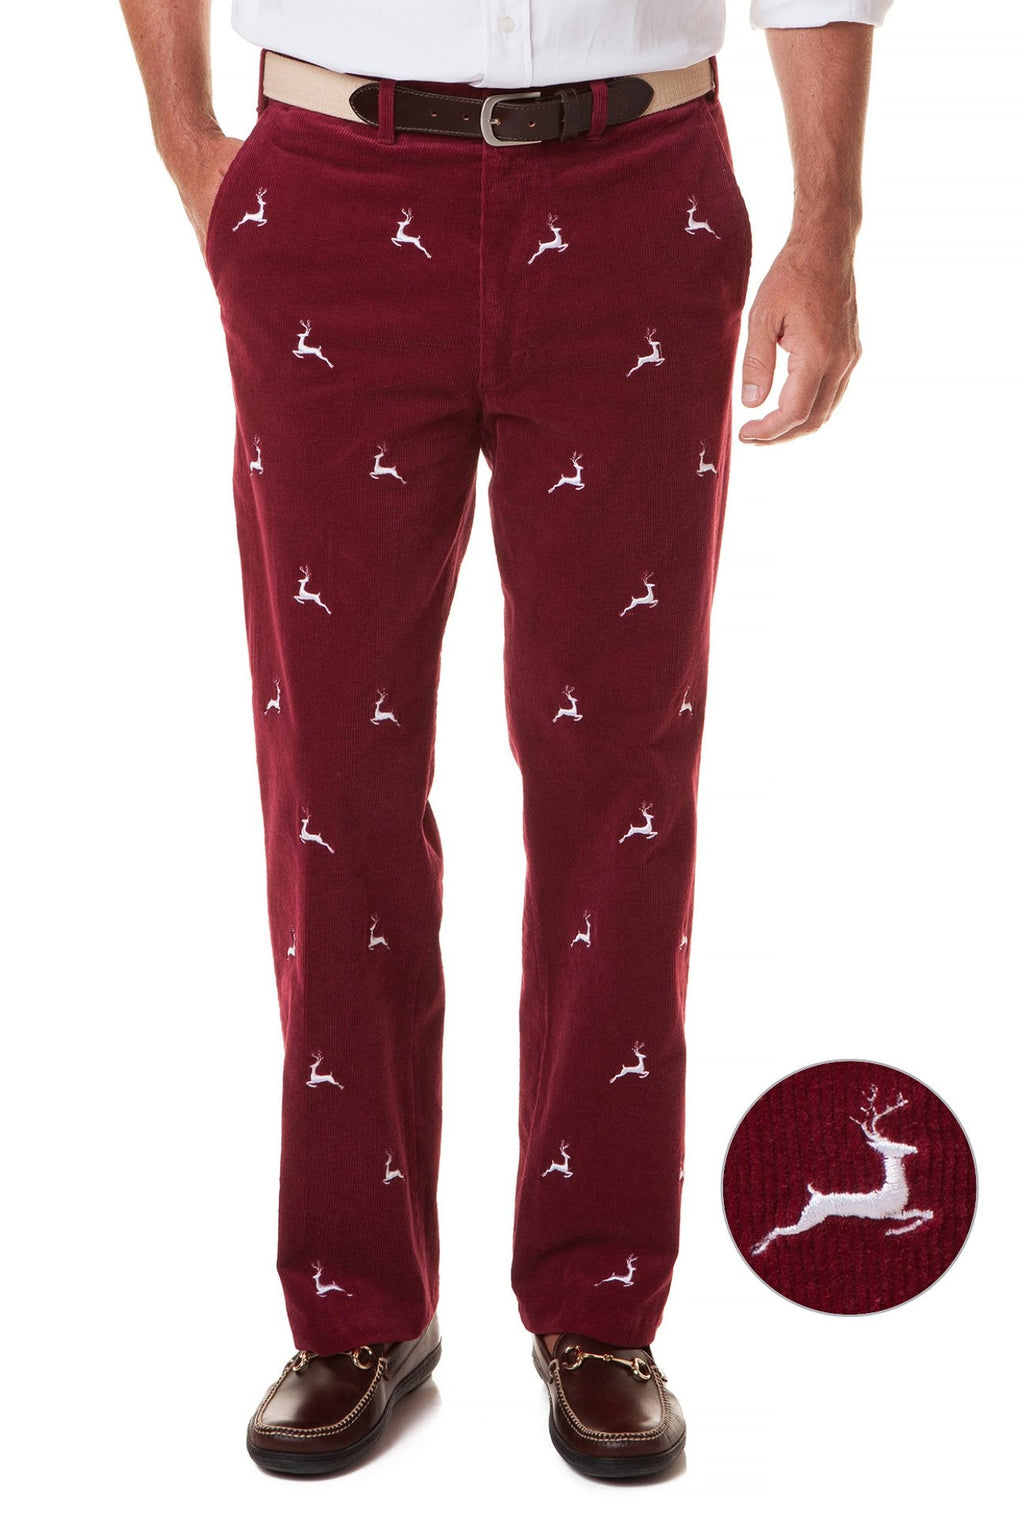 Beachcomber Stretch Corduroy Pant Merlot with Leaping Reindeer - MENS EMBROIDERED PANTS - Castaway Nantucket Island